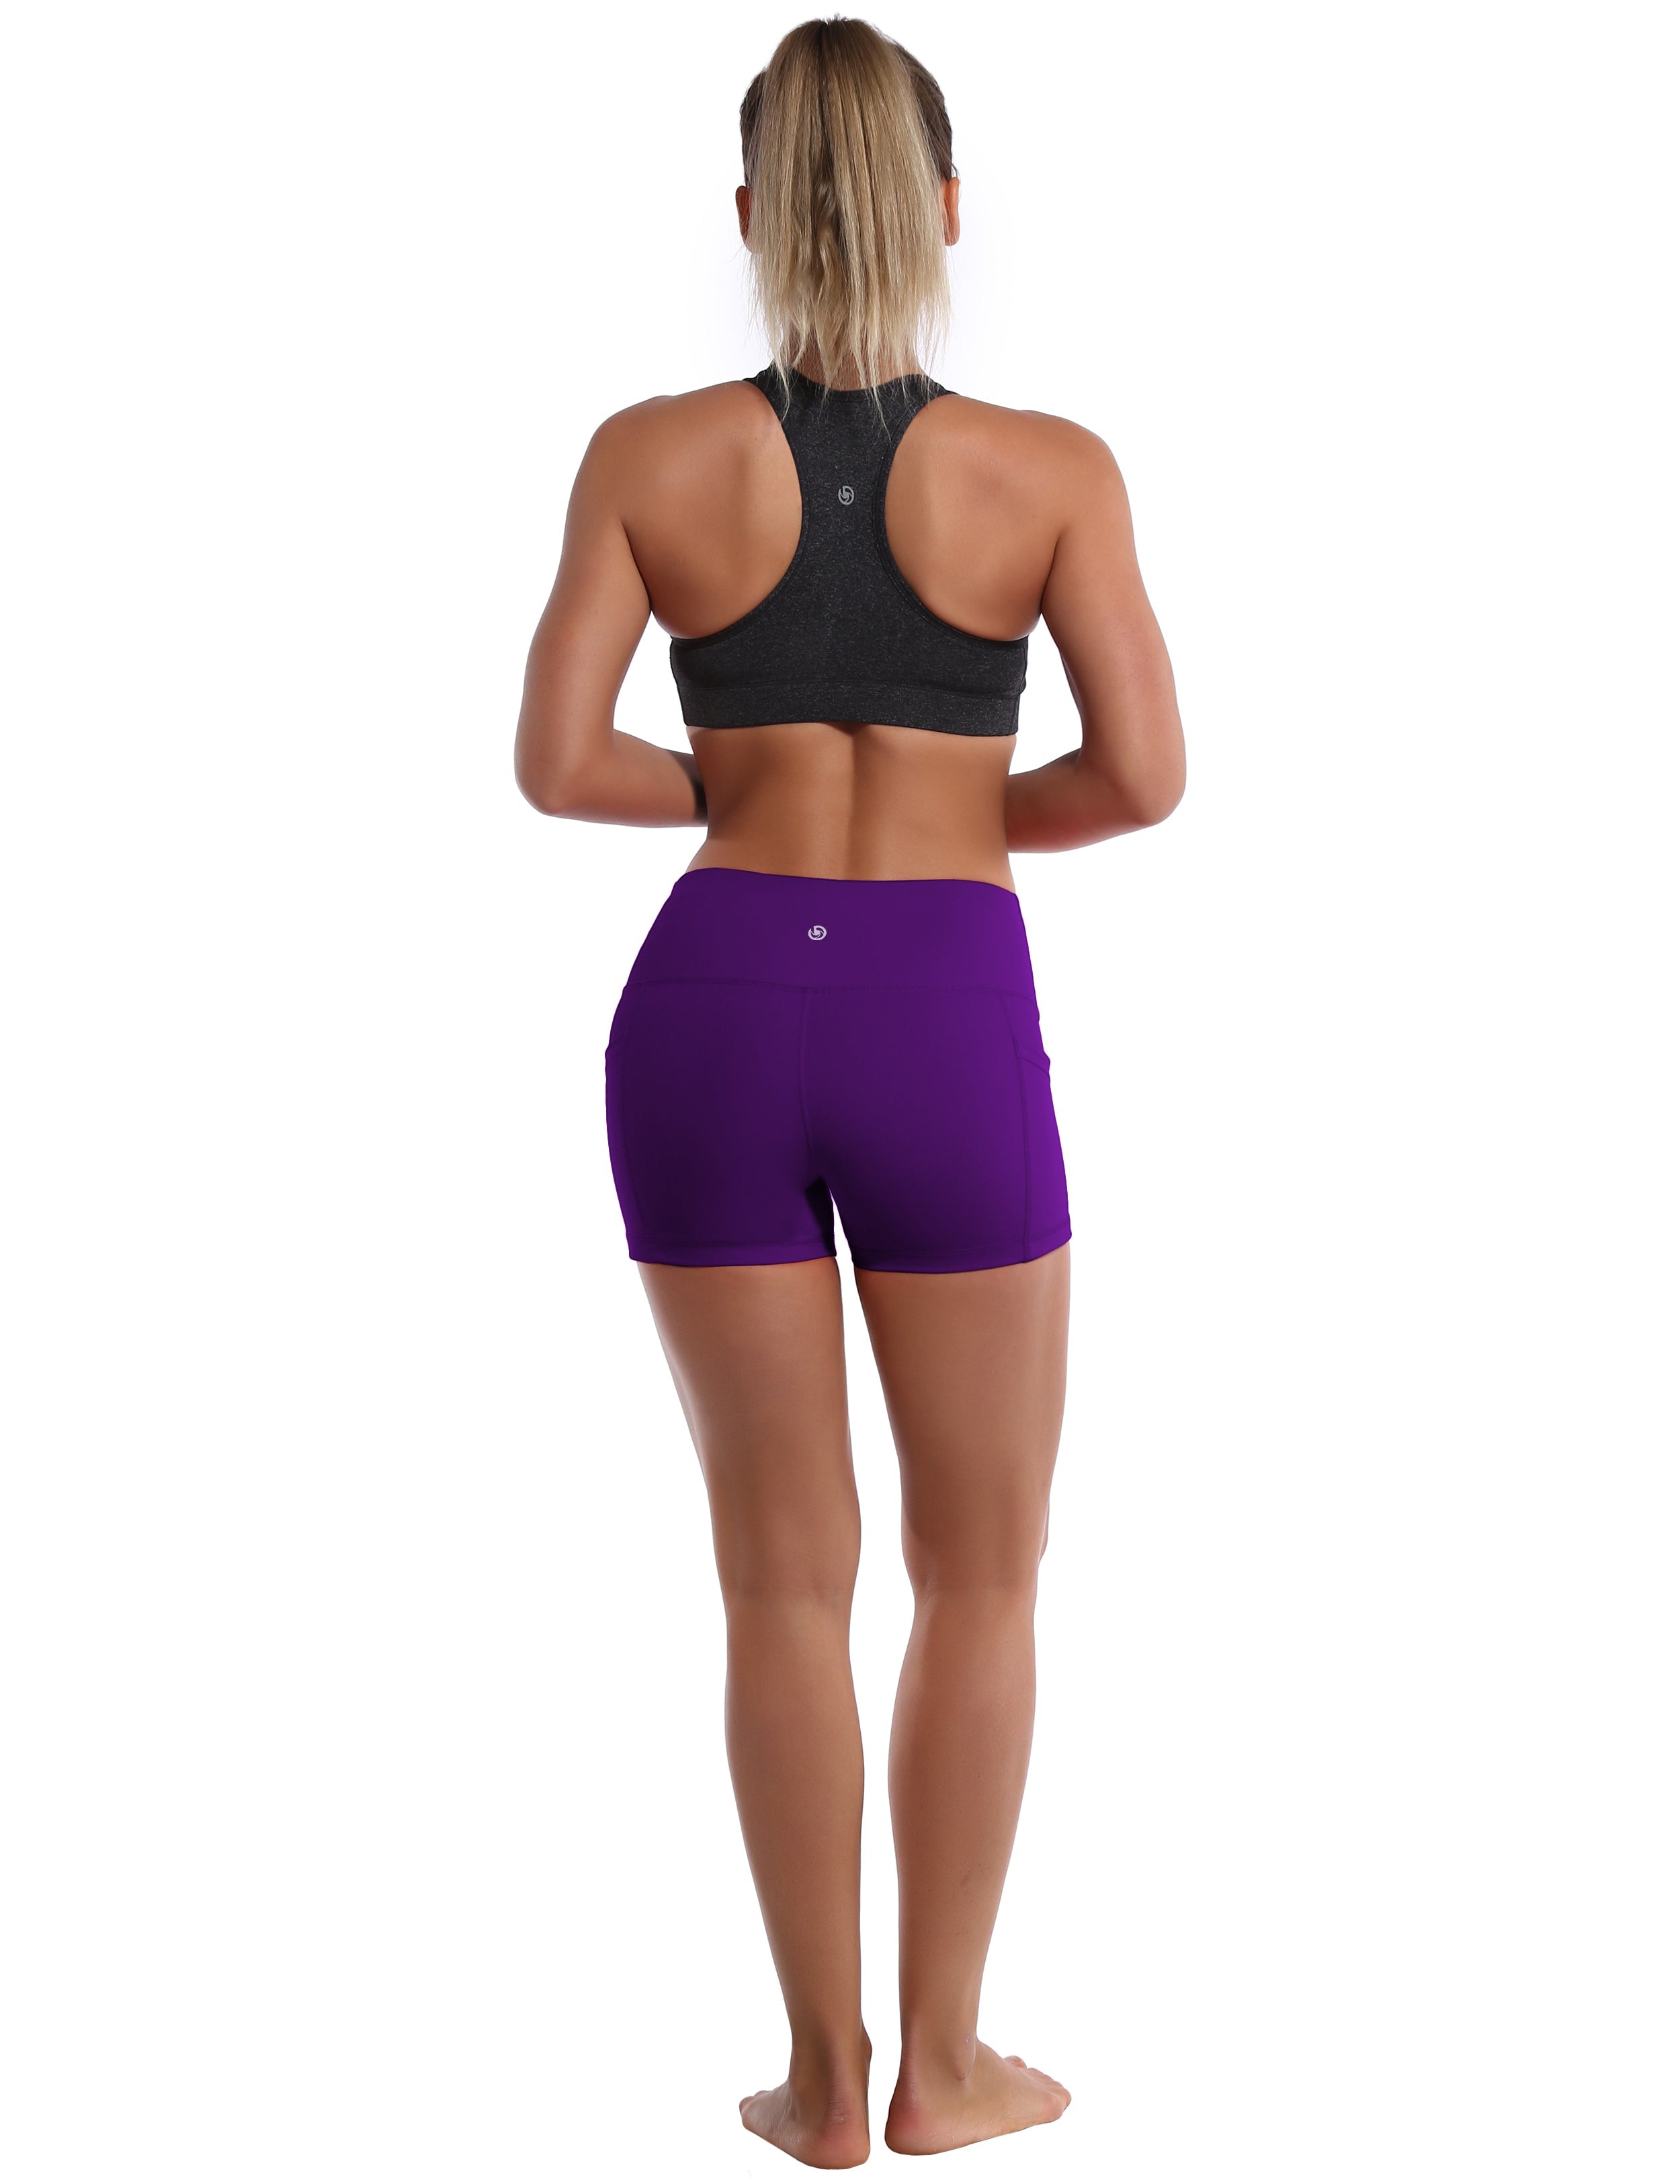 2.5" Side Pockets Pilates Shorts eggplantpurple Sleek, soft, smooth and totally comfortable: our newest sexy style is here. Softest-ever fabric High elasticity High density 4-way stretch Fabric doesn't attract lint easily No see-through Moisture-wicking Machine wash 78% Polyester, 22% Spandex